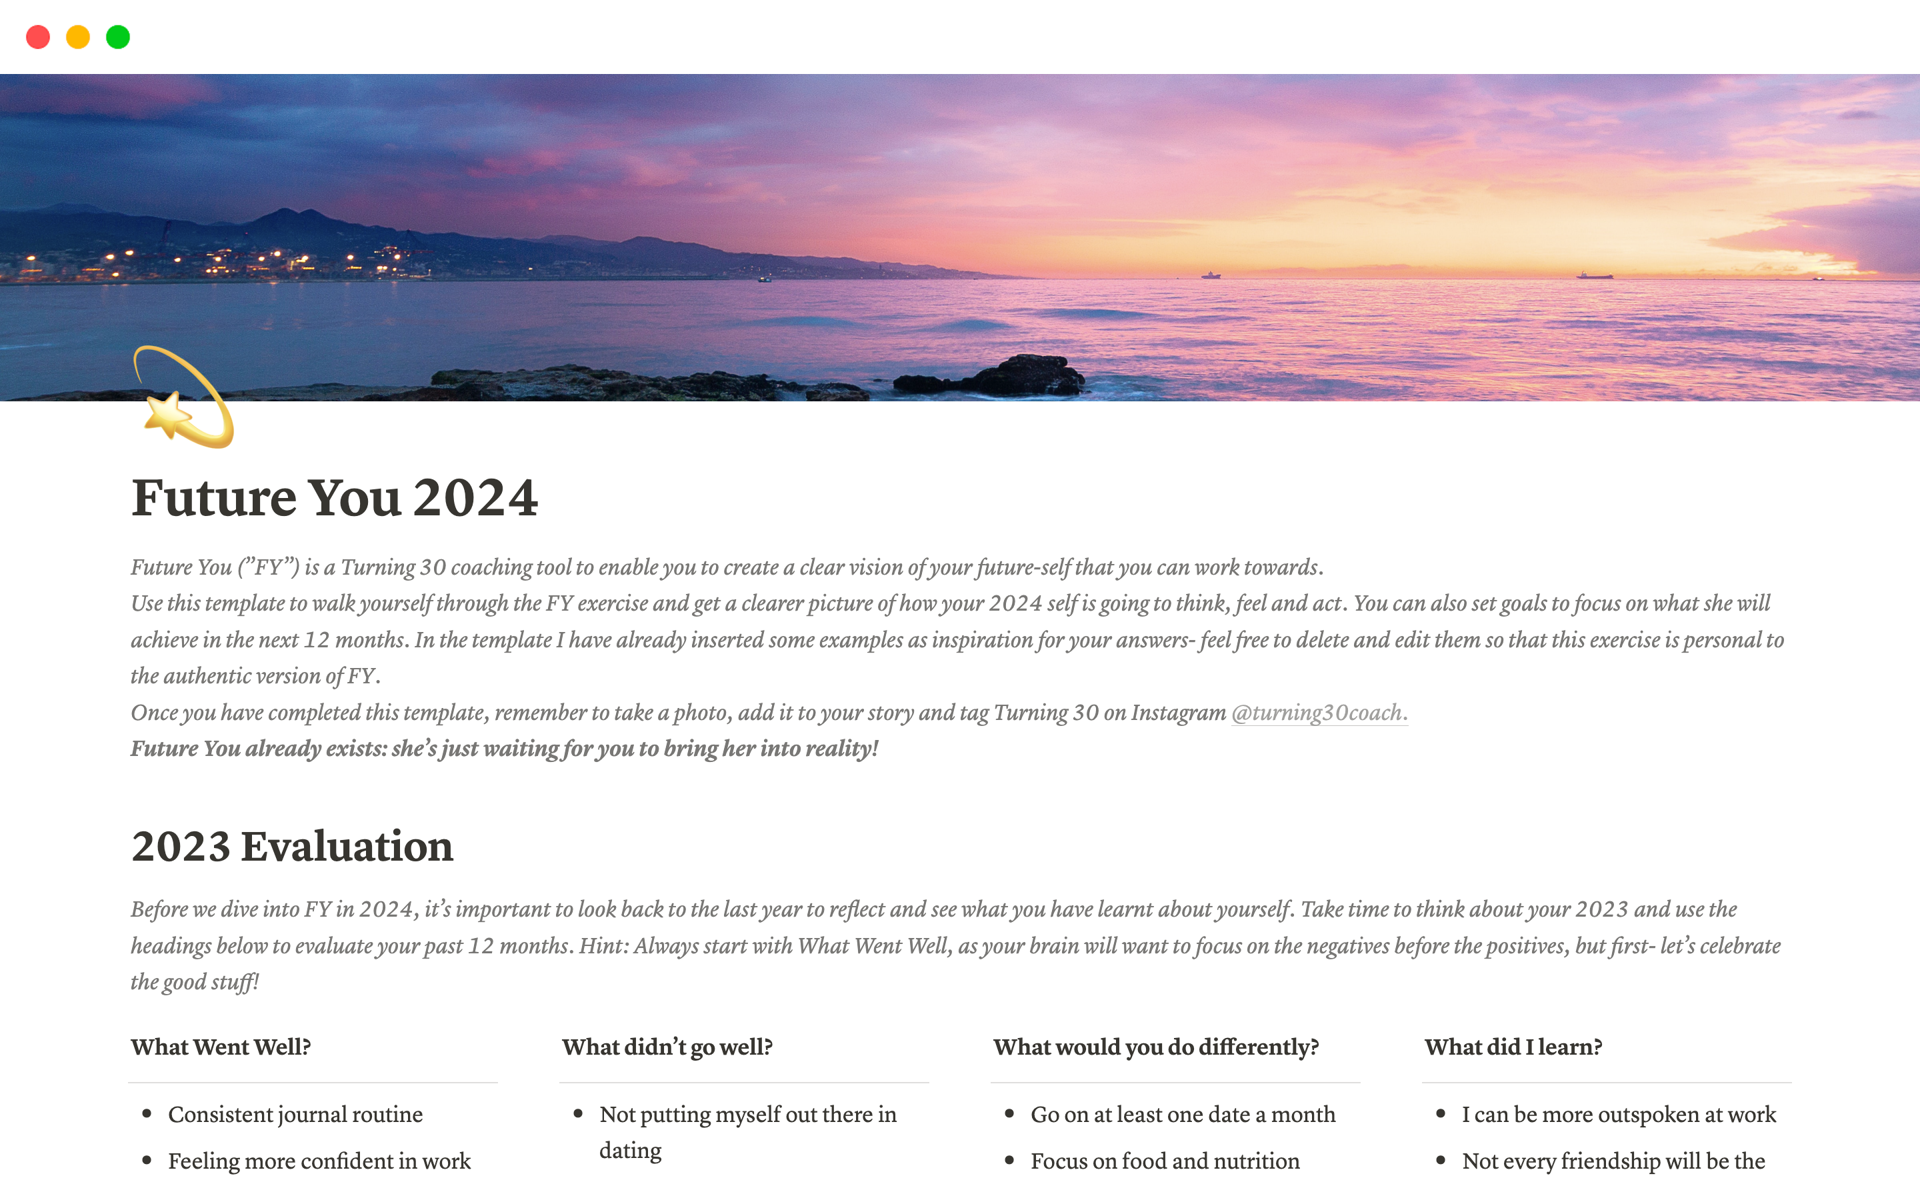 Get clear on who you are becoming in 2024 by filling out this Future You template. 